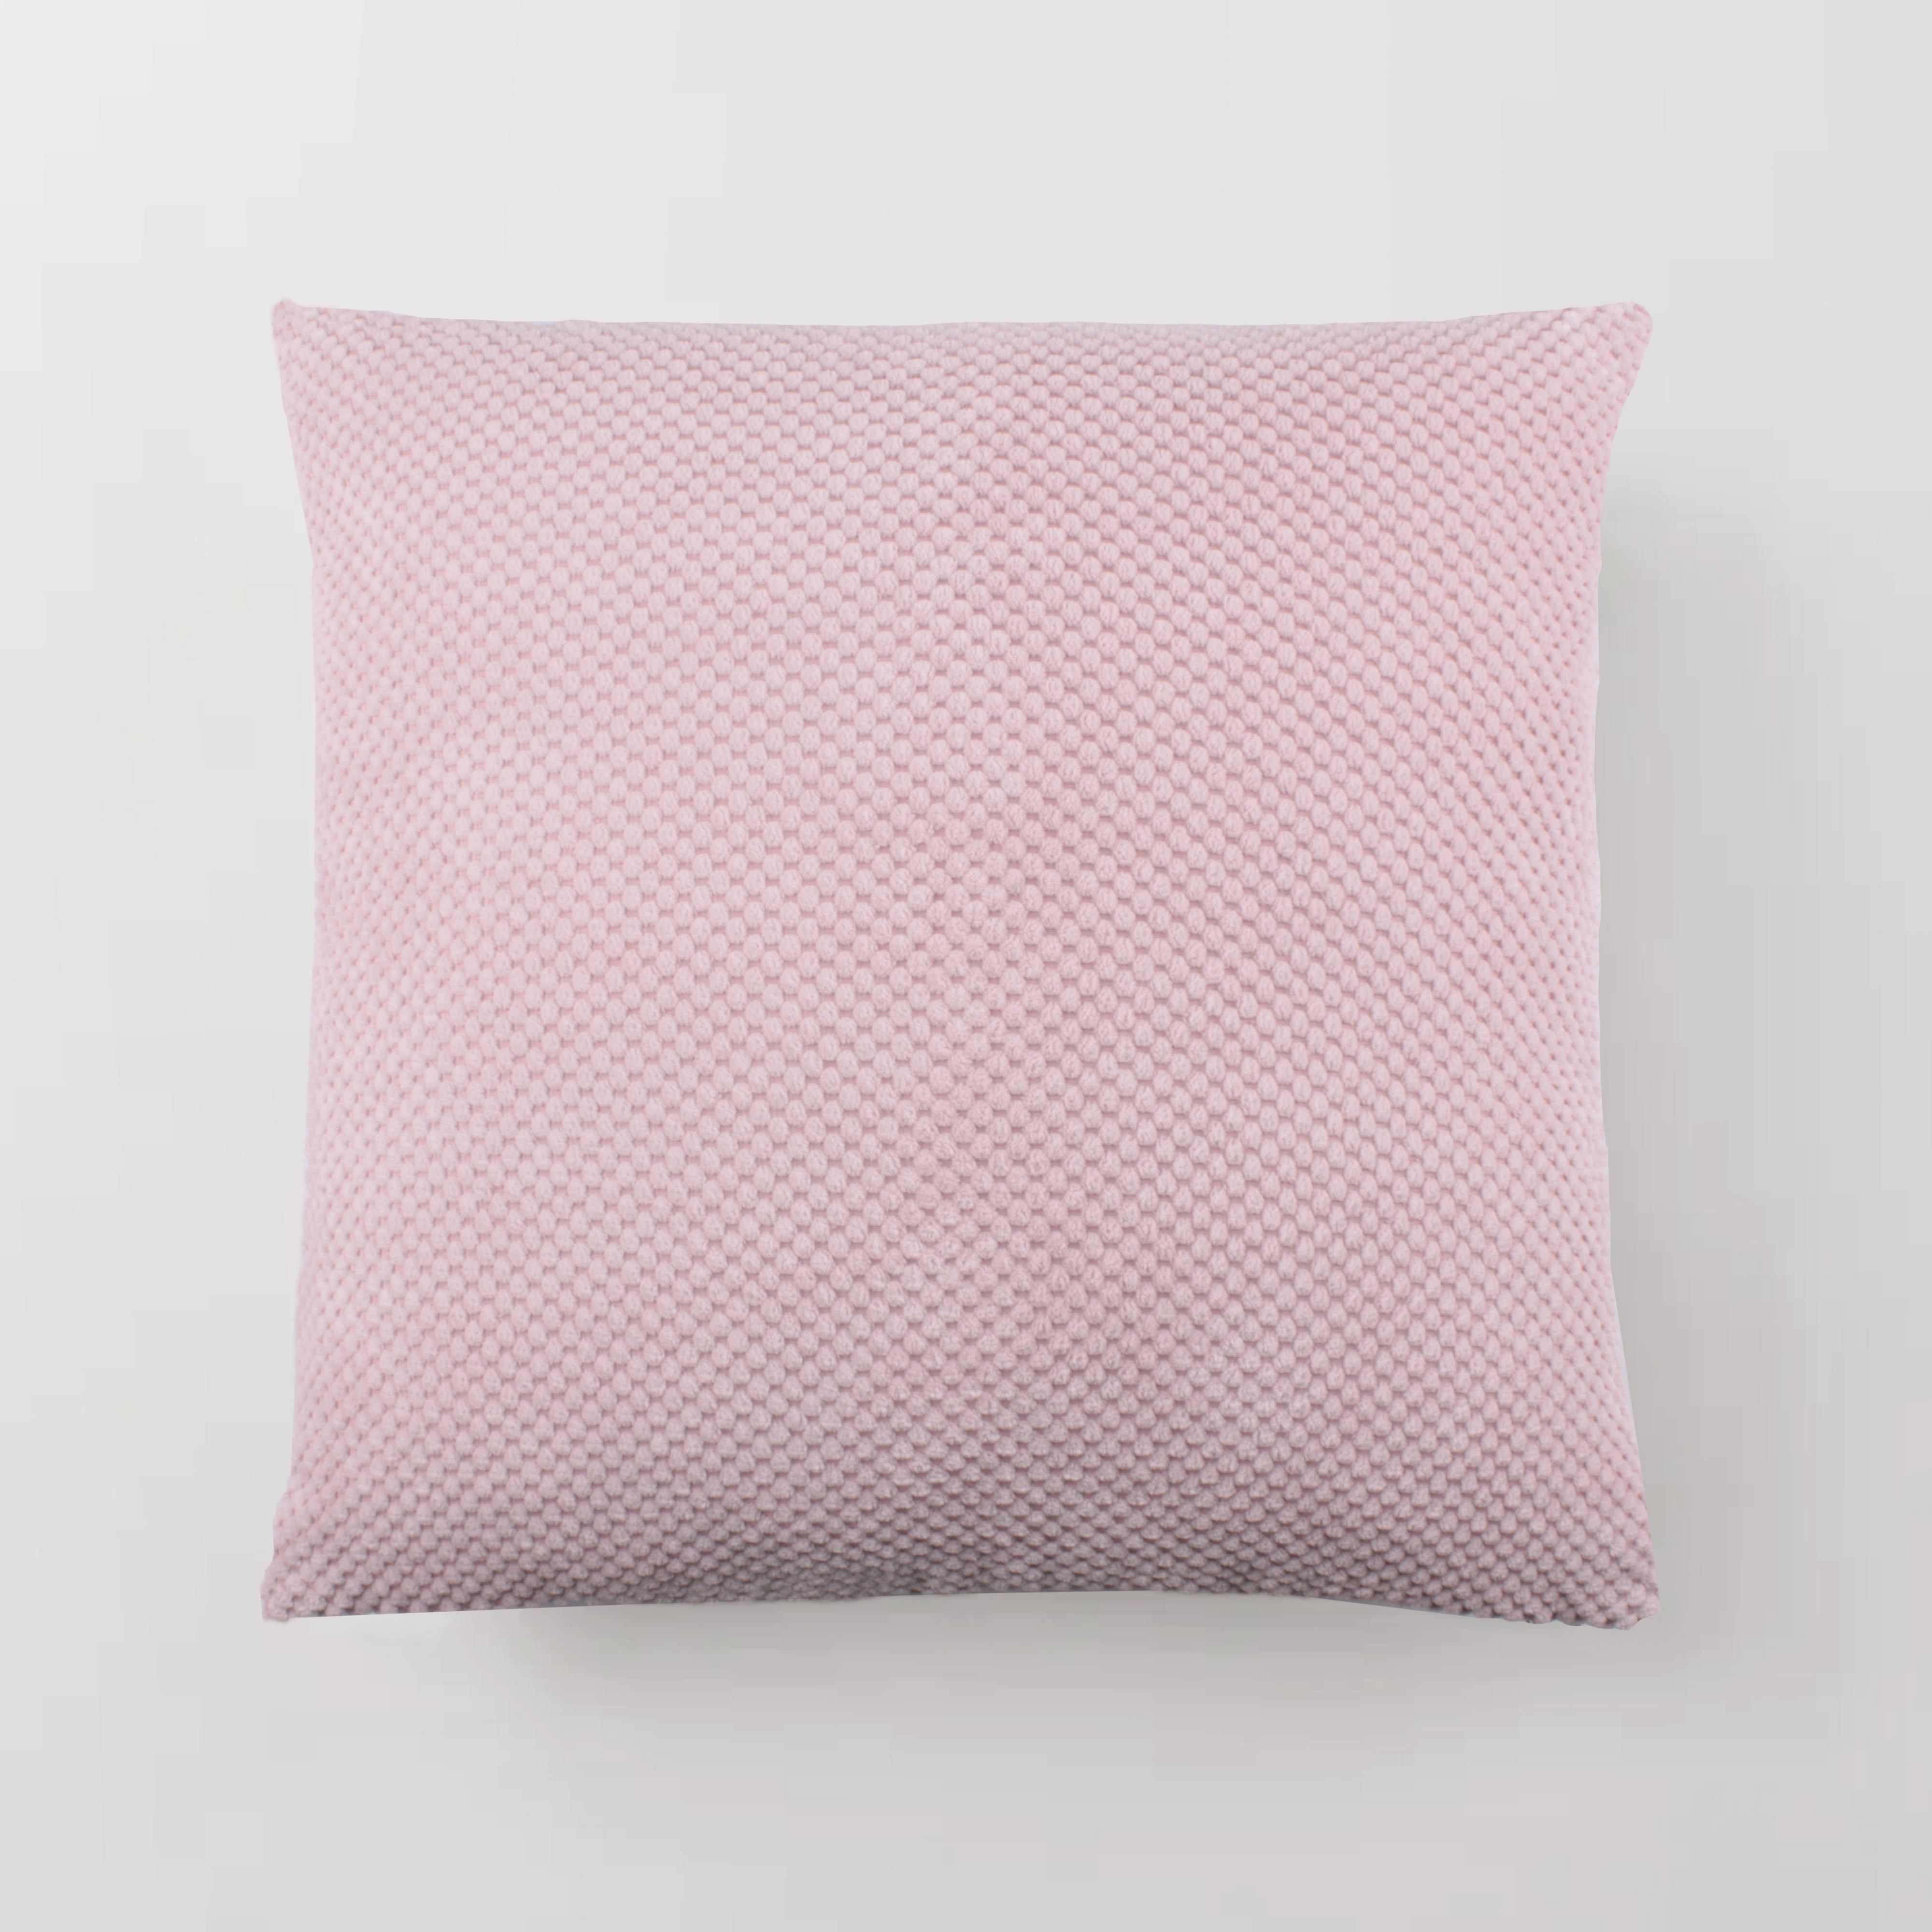 Chenille Spot Cushion Cover Pink